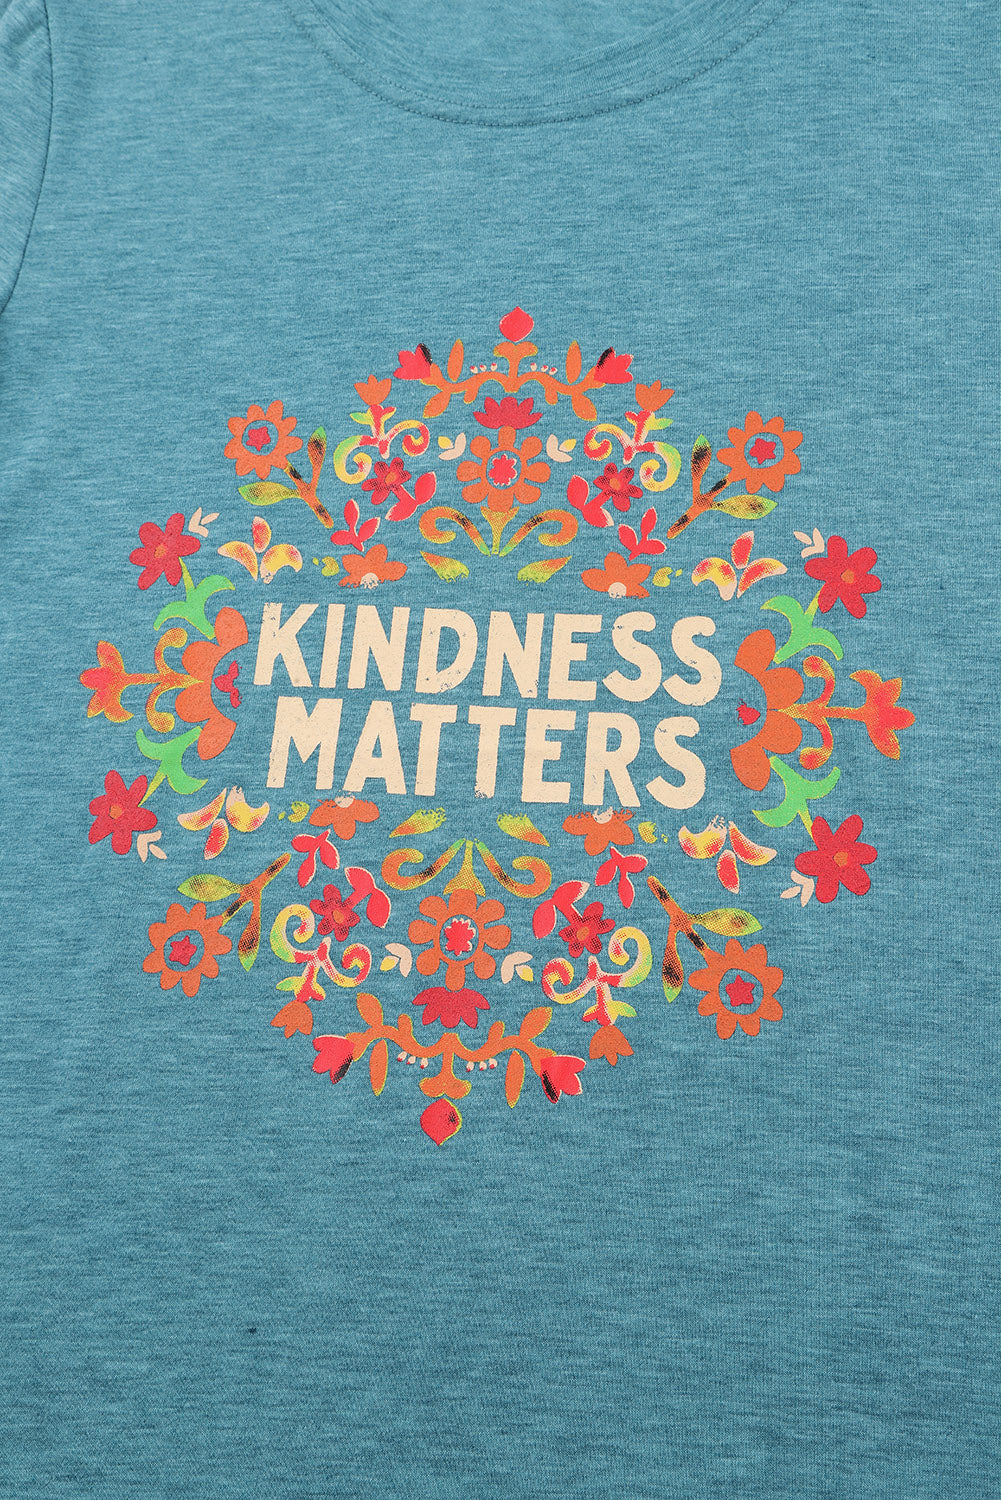 KINDNESS MATTERS Flower Graphic Tee - Kawaii Stop - Casual Style, Comfortable Fit, Easy Care, Fashionable Statement, Flower Design, Graphic Tee, Kindness Matters, Positive Vibes, Ship From Overseas, Short Sleeves, Spread Kindness, SYNZ, T-Shirt, T-Shirts, Tee, Women's Clothing, Women's Top